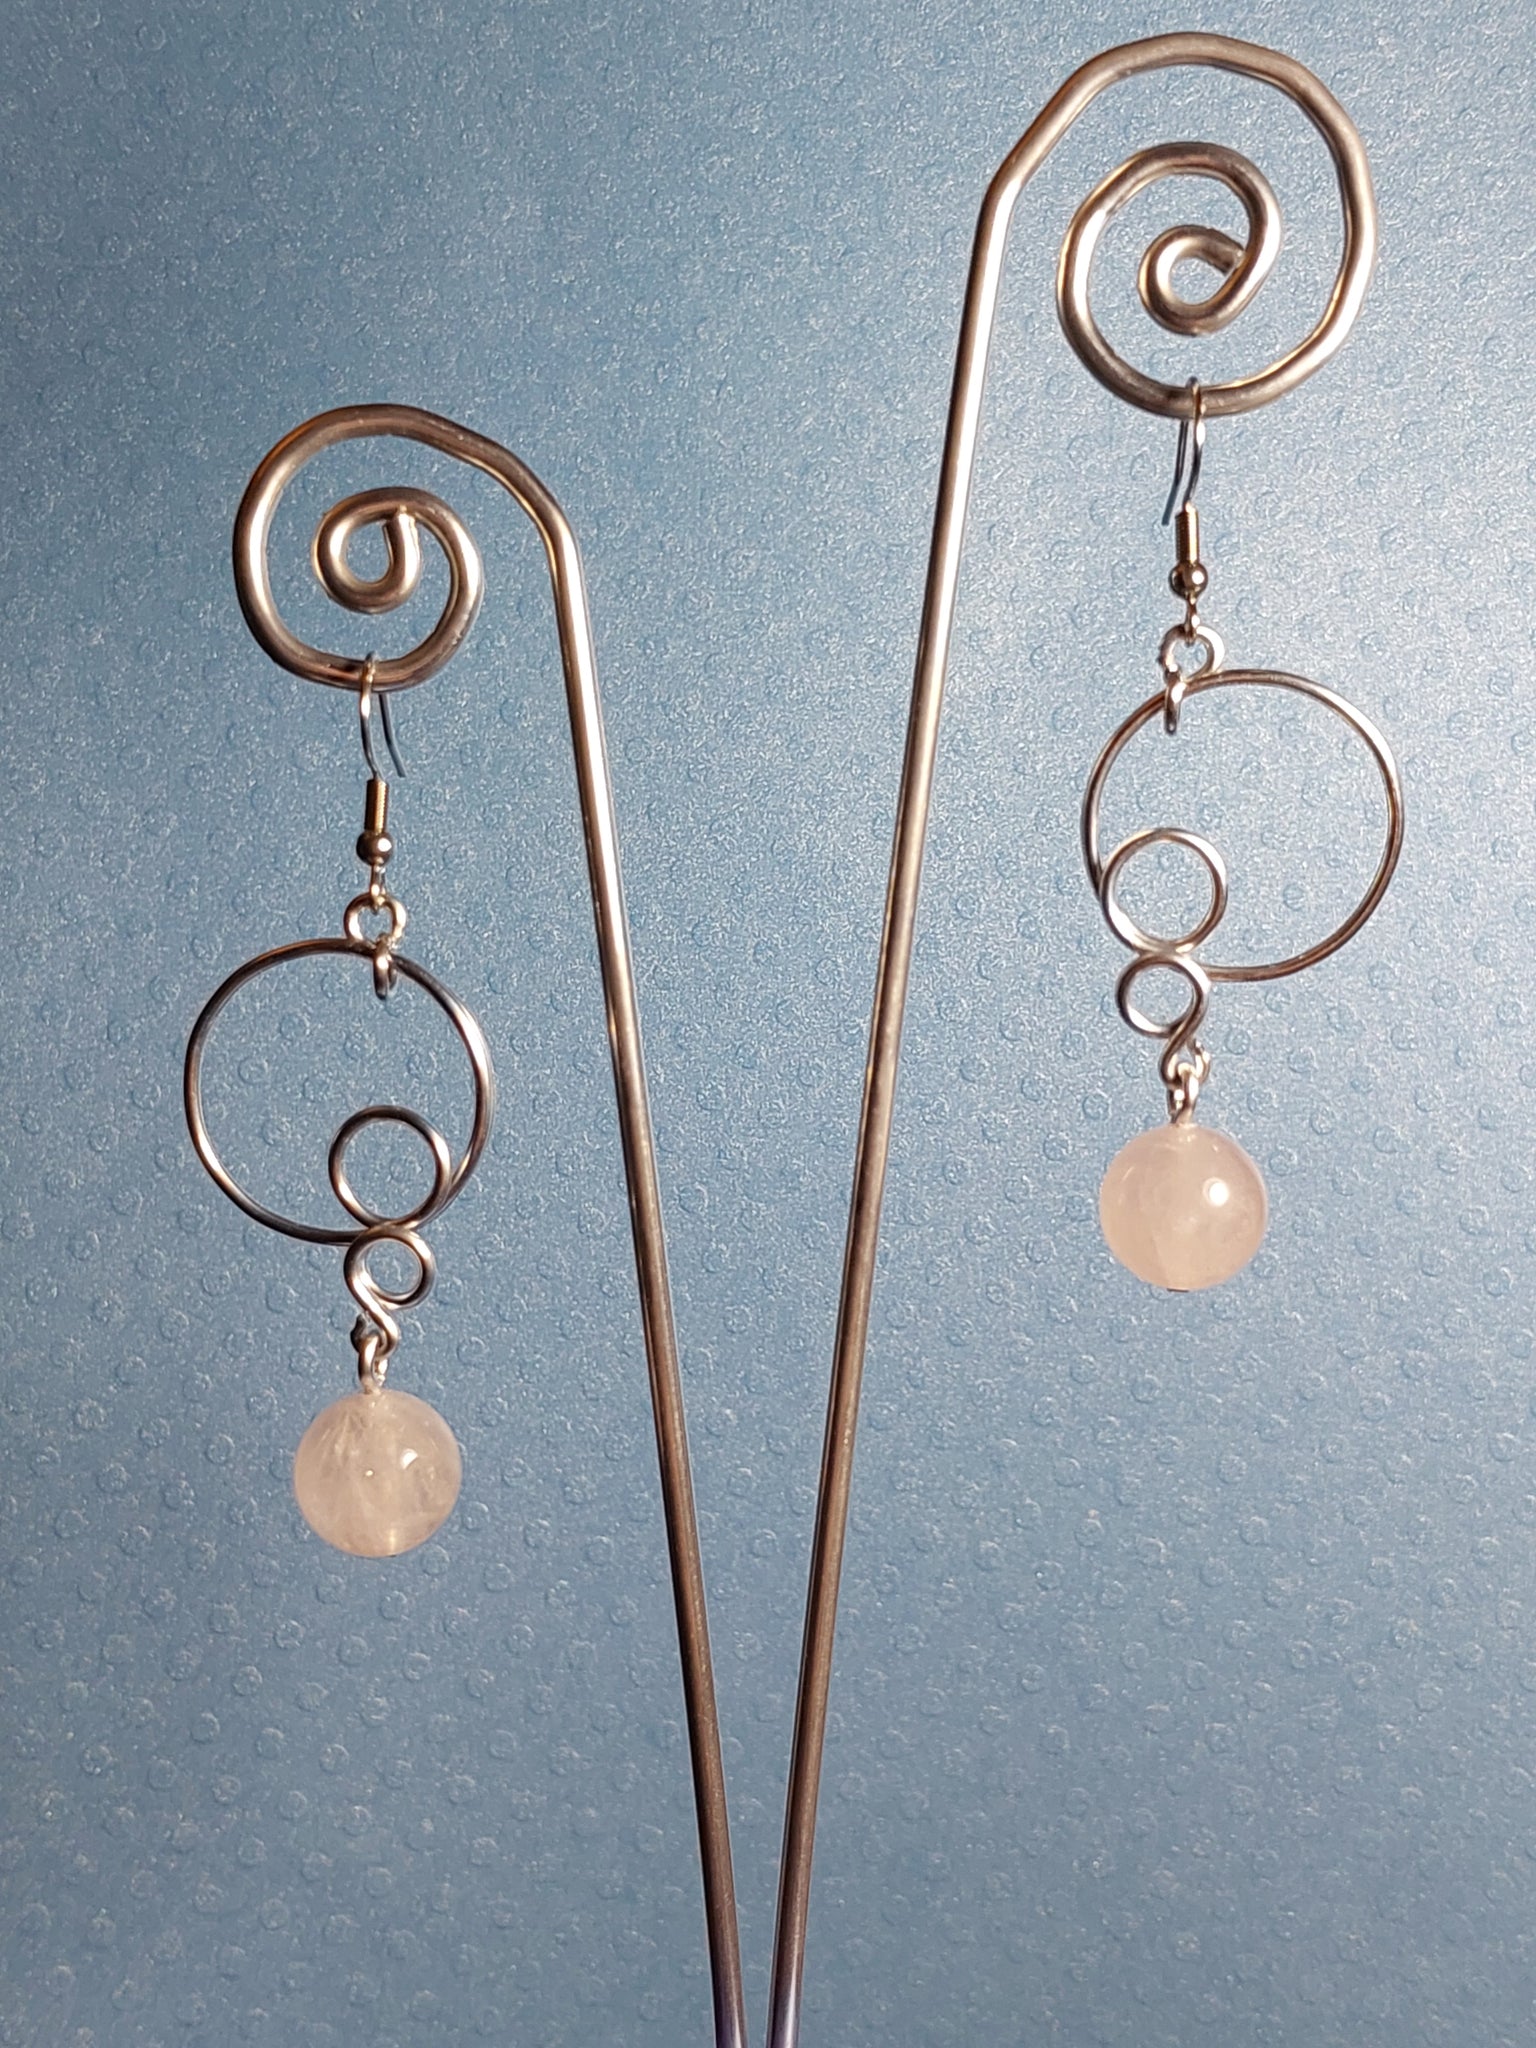 Handcrafted Aluminum Wire Earrings with Rose Quartz Beads